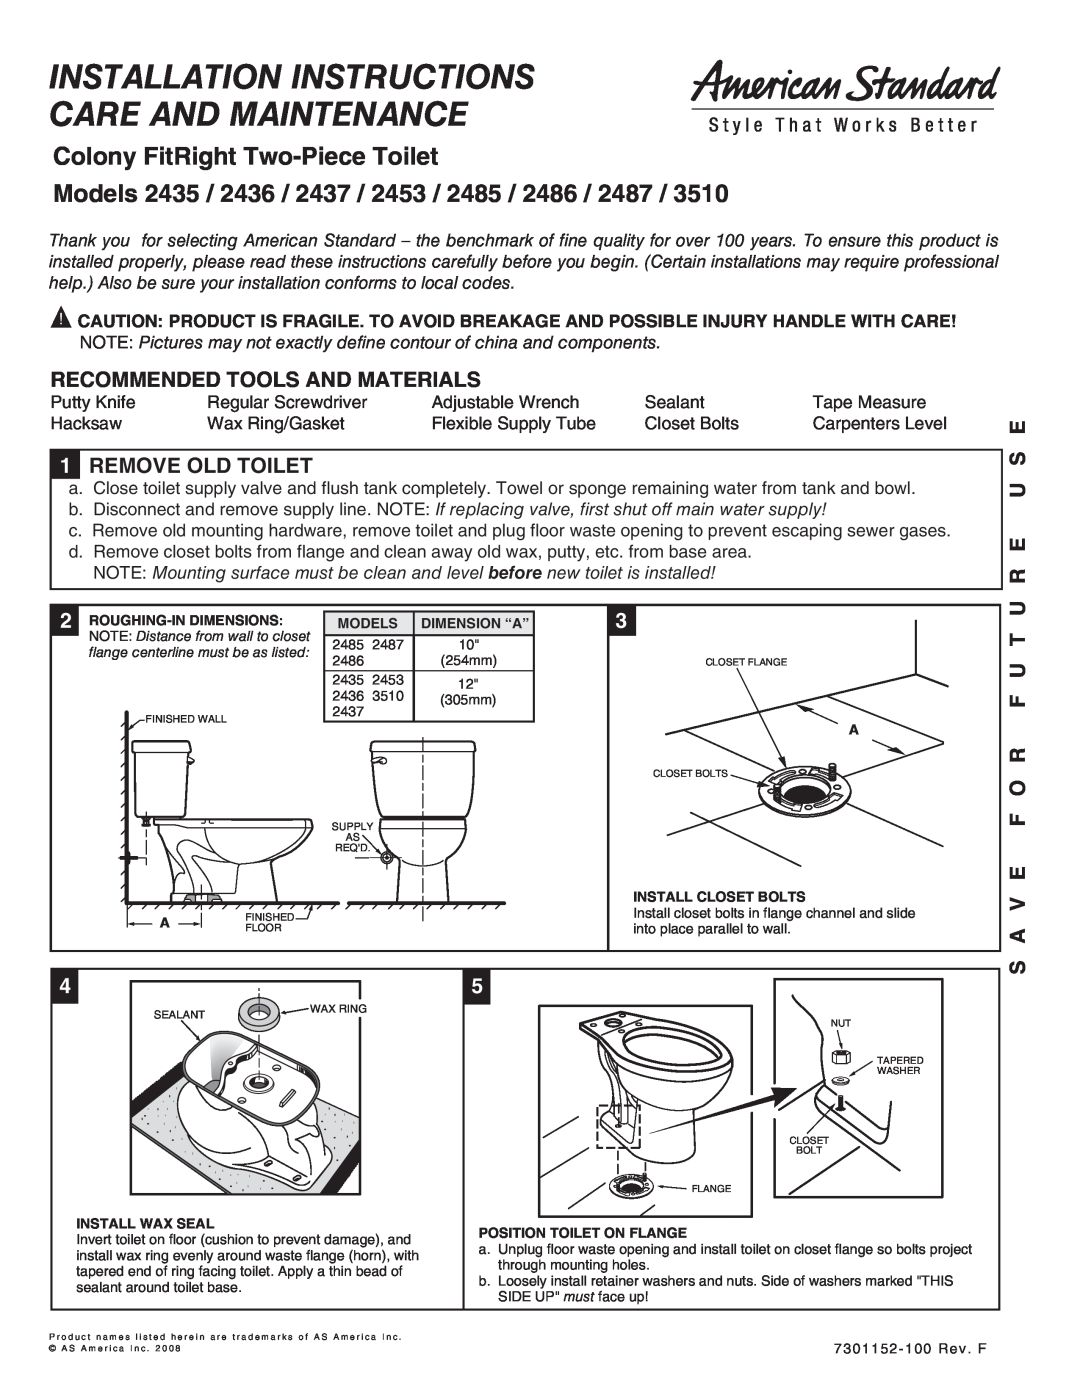 American Standard 2487, 2453, 2485, 3510 installation instructions Recommended Tools And Materials, 1REMOVE OLD TOILET 